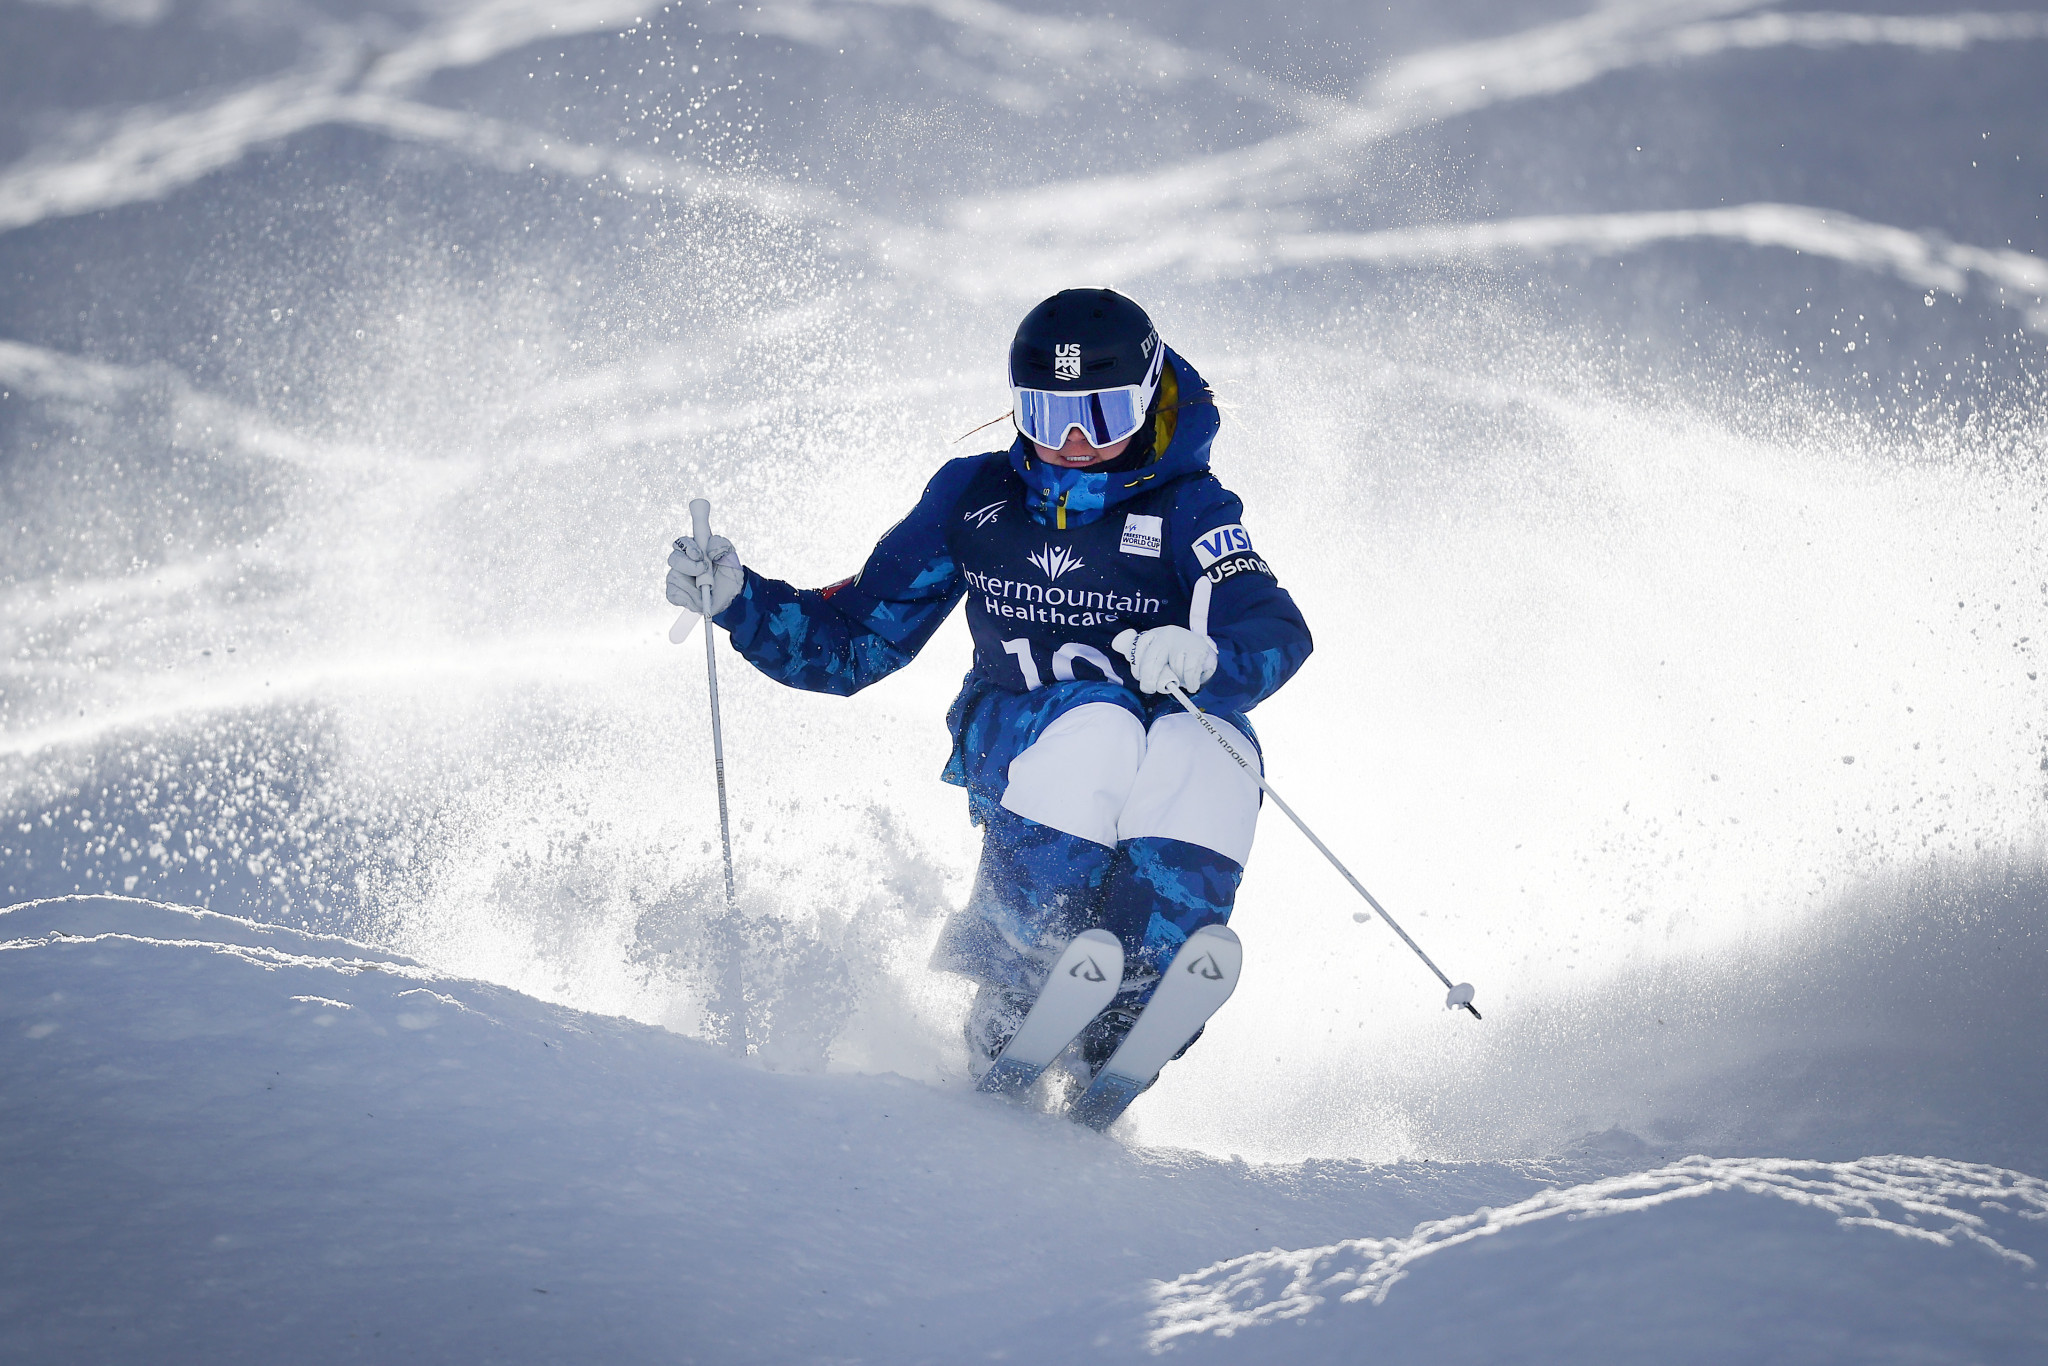 Kingsbury and 16-year-old Owens win dual moguls at Deer Valley World Cup